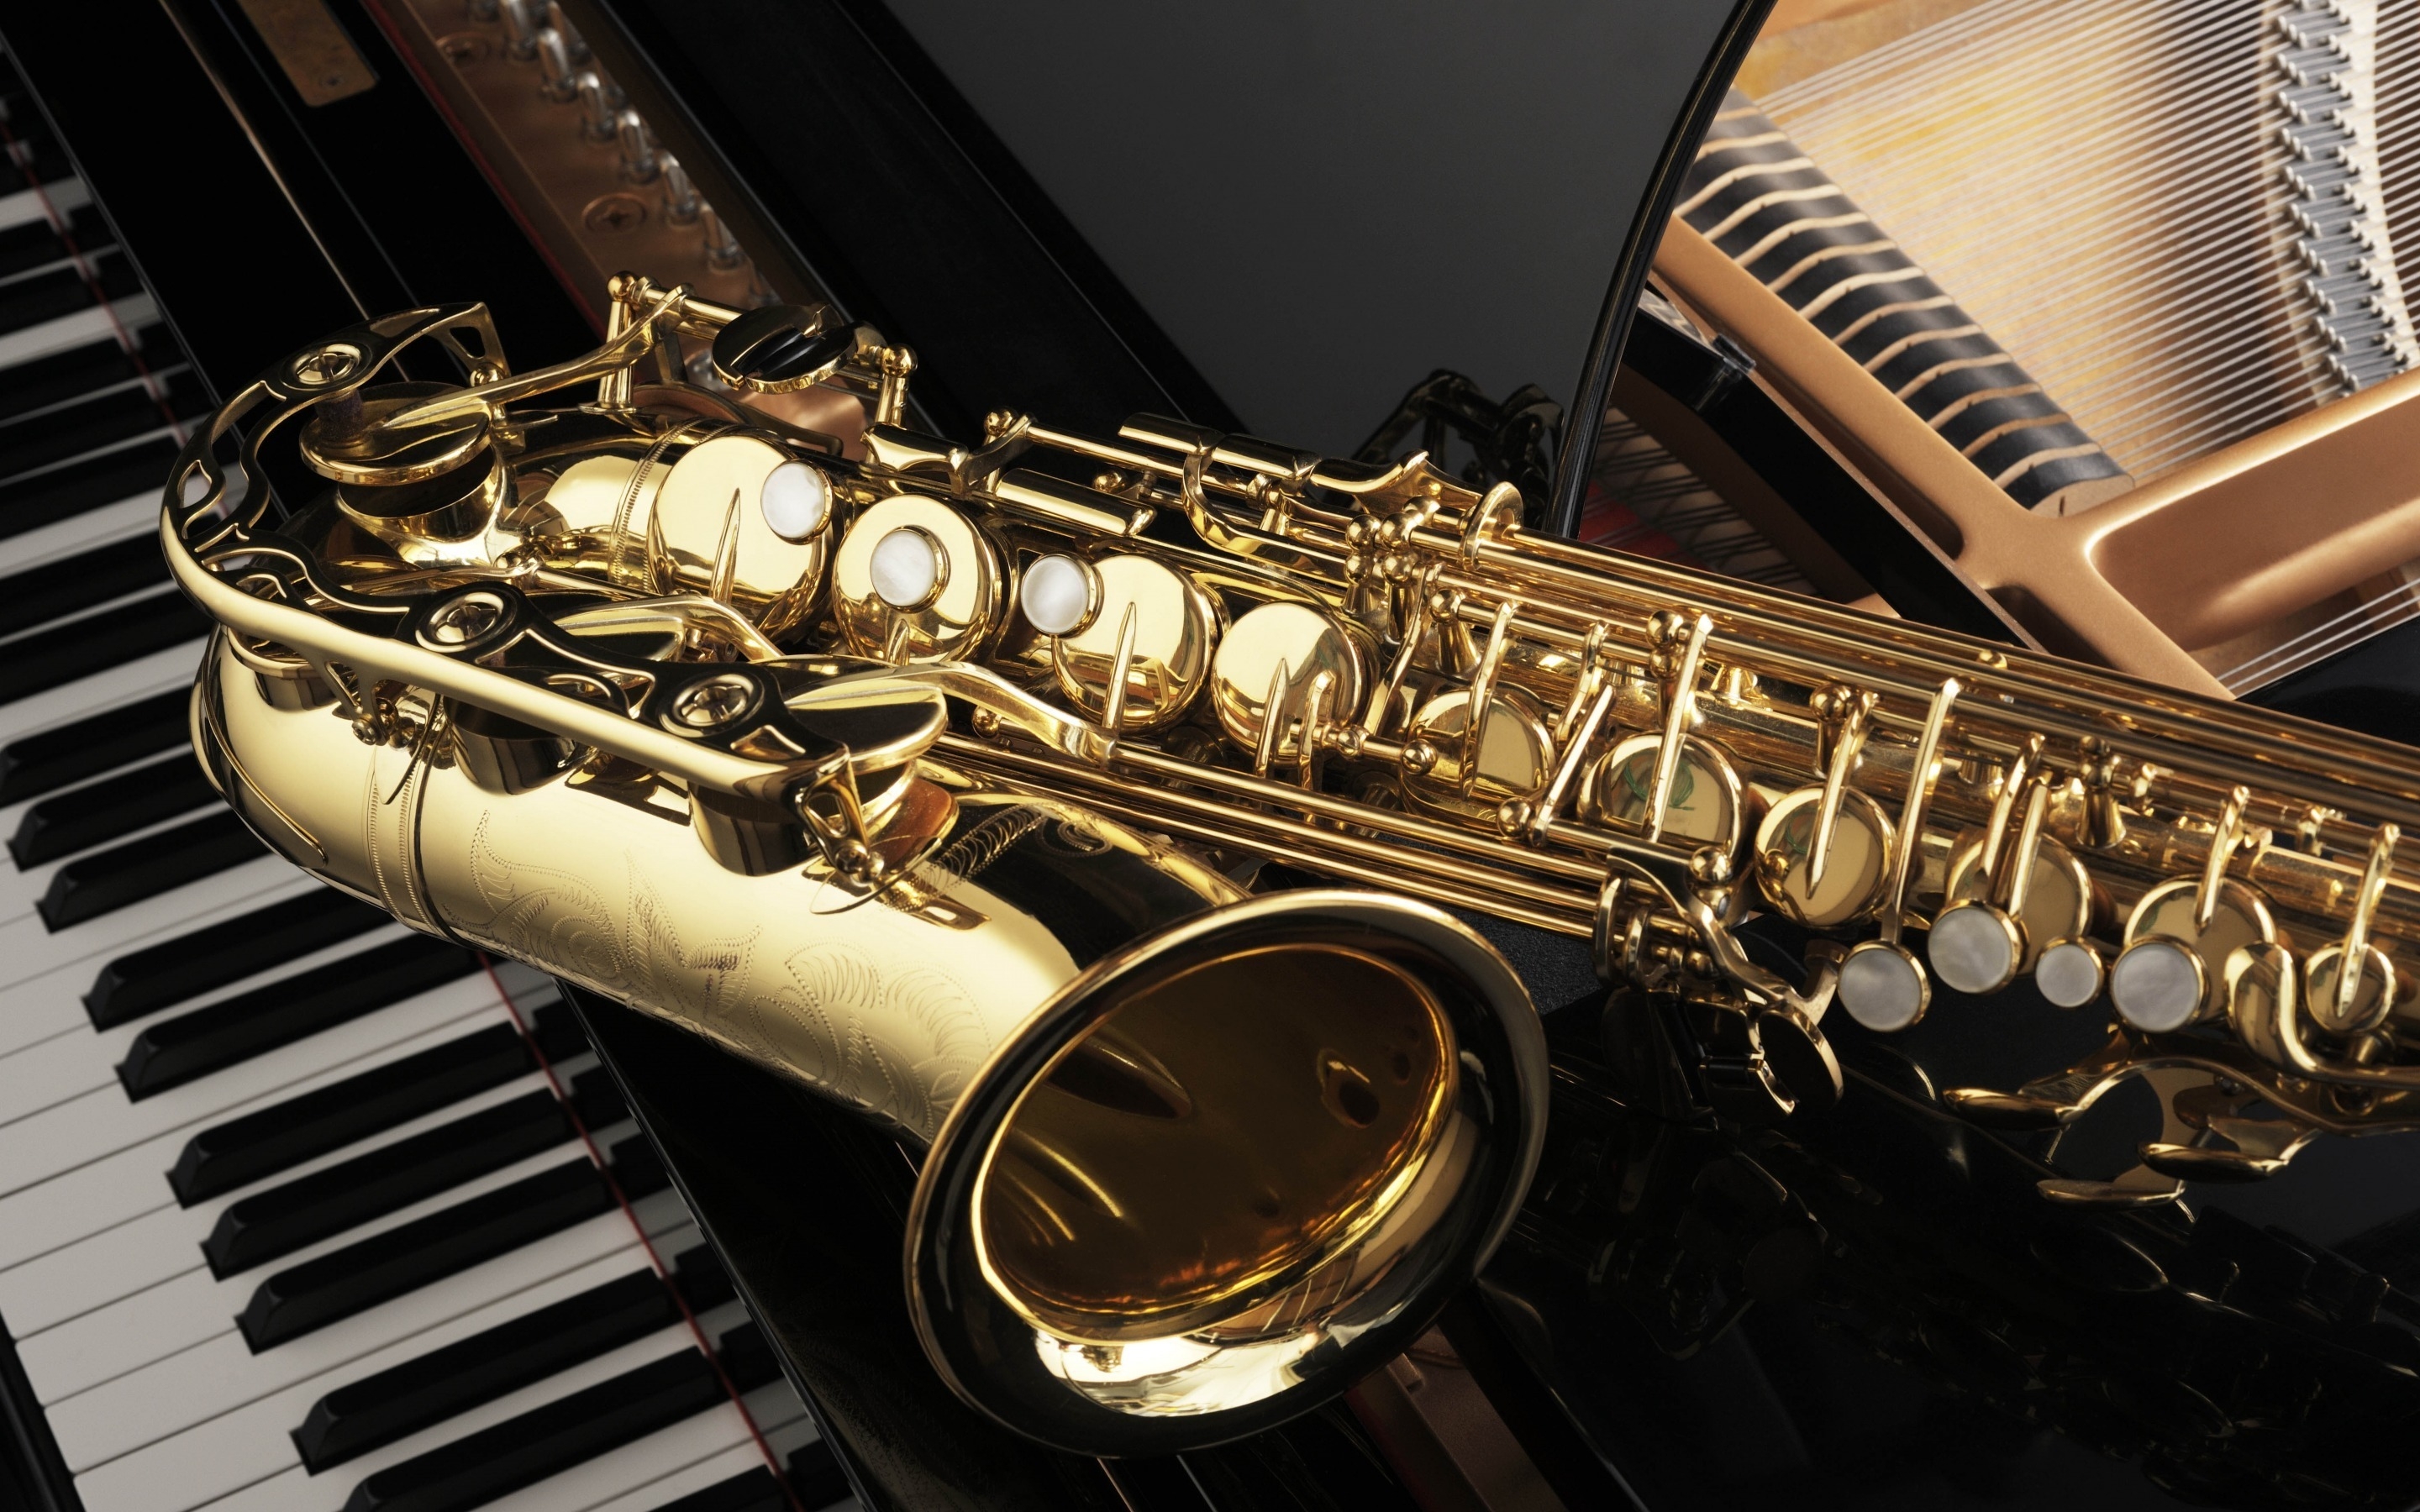 Saxophone and Piano for 2880 x 1800 Retina Display resolution